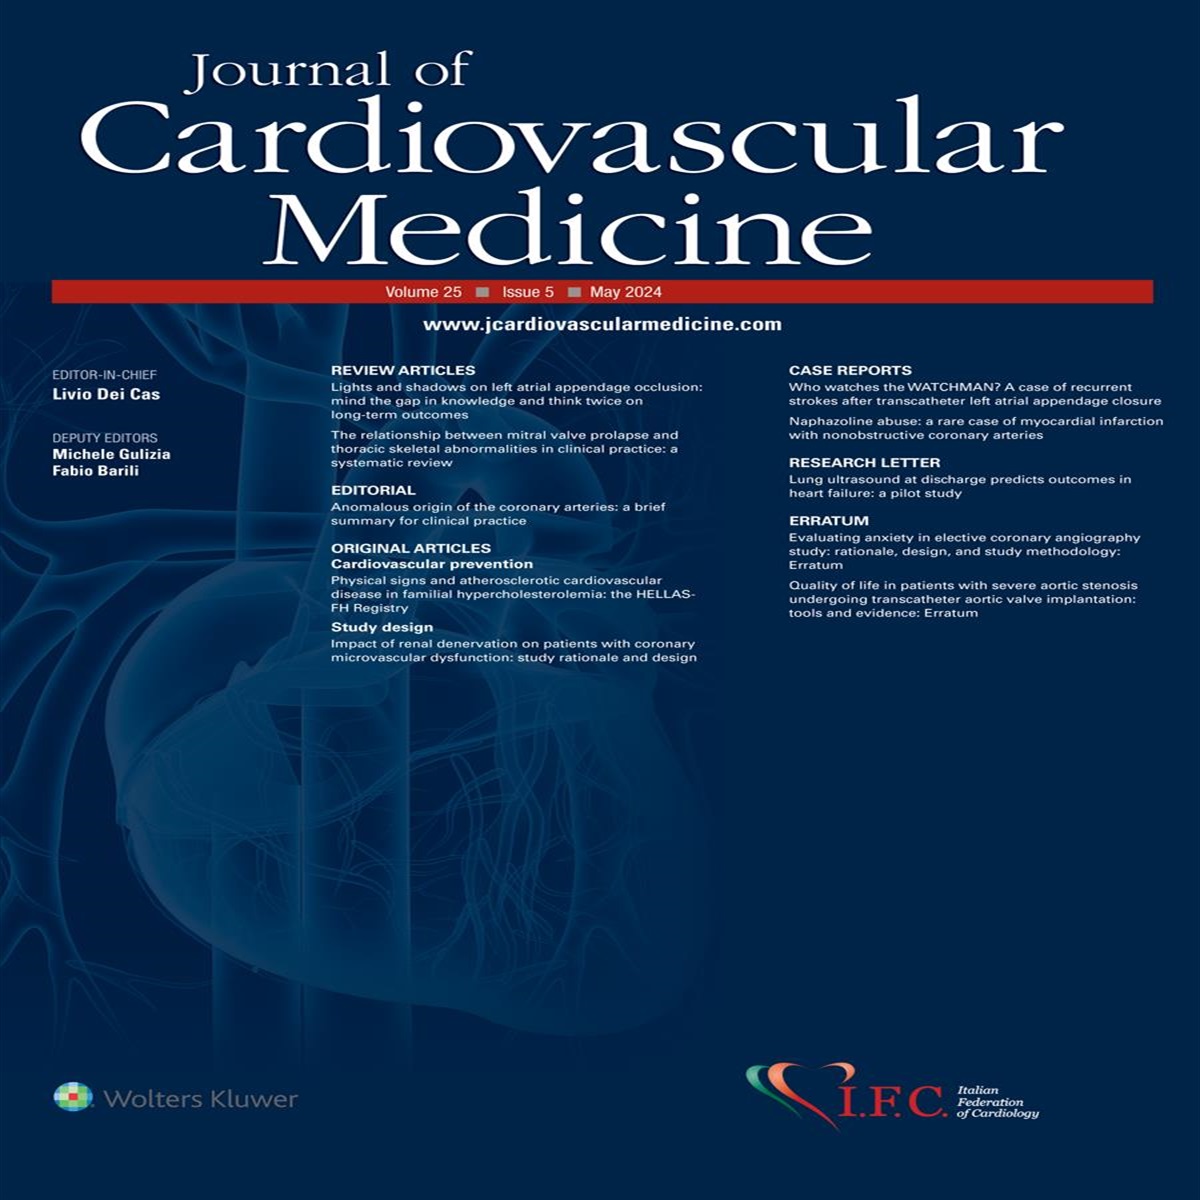 Quality of life in patients with severe aortic stenosis undergoing transcatheter aortic valve implantation: tools and evidence: Erratum